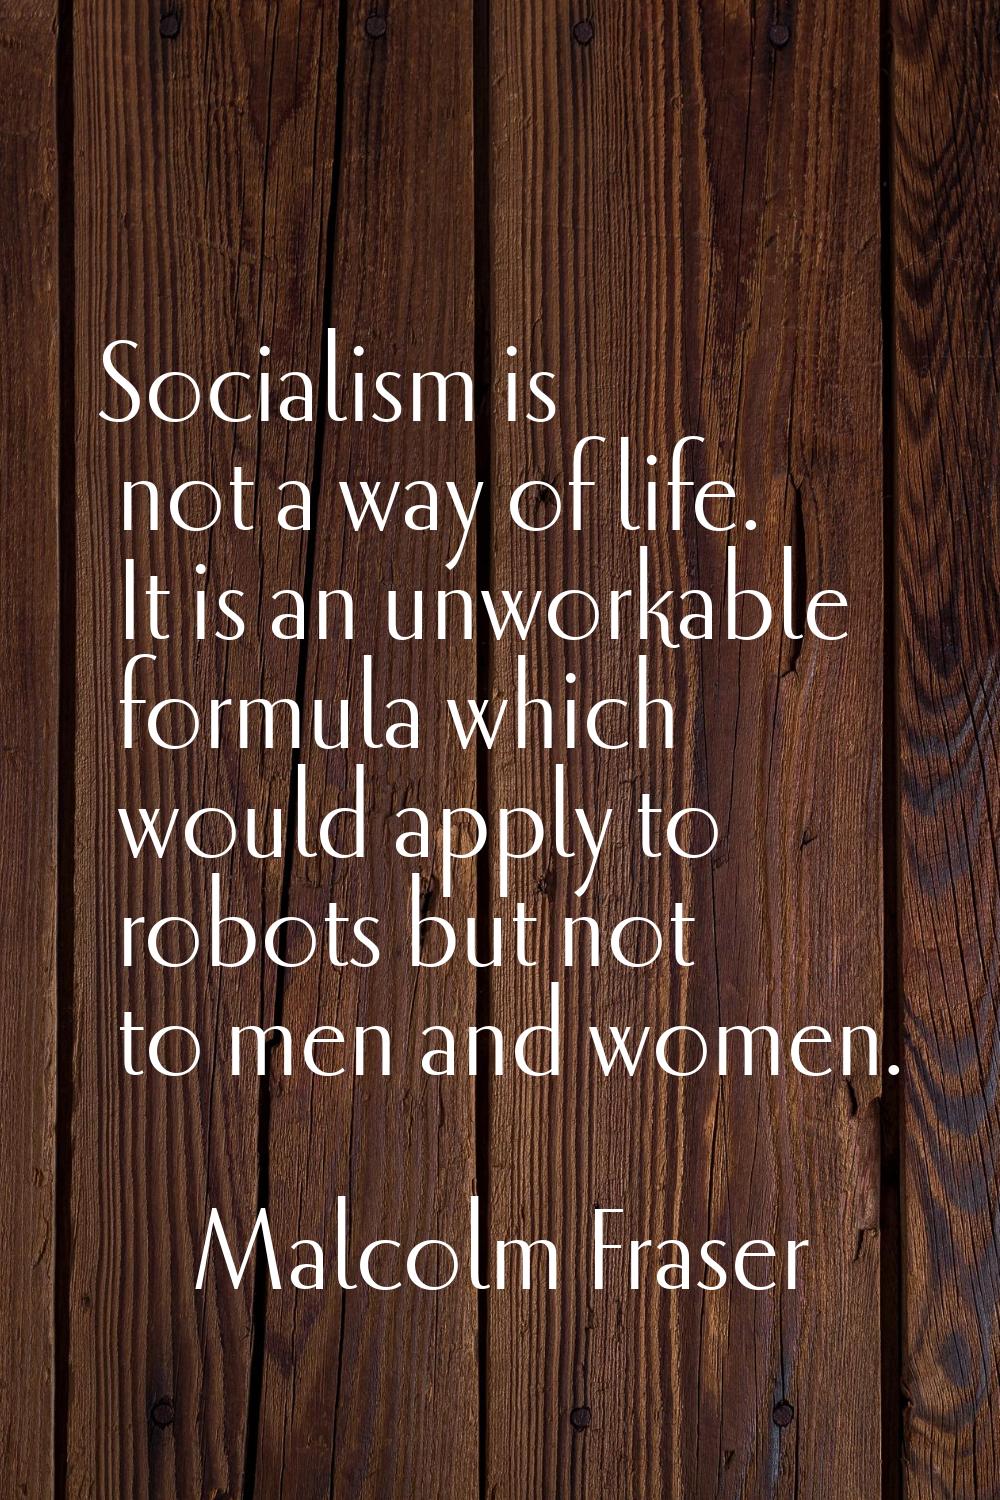 Socialism is not a way of life. It is an unworkable formula which would apply to robots but not to 